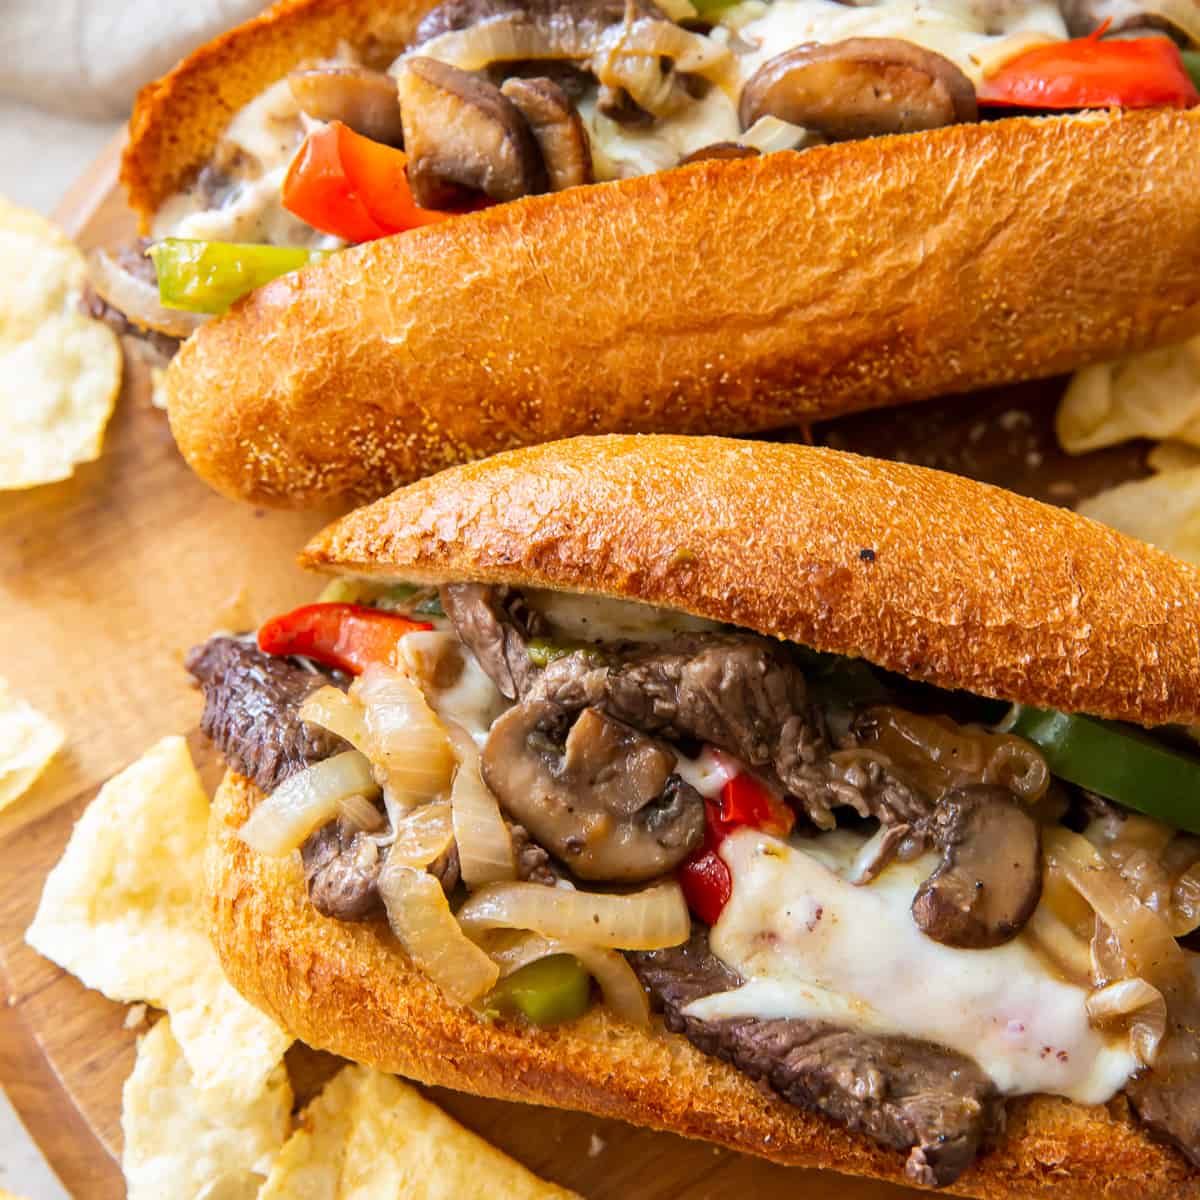 How to Make Philly Cheesesteak - Best Philly Cheesesteak Recipe